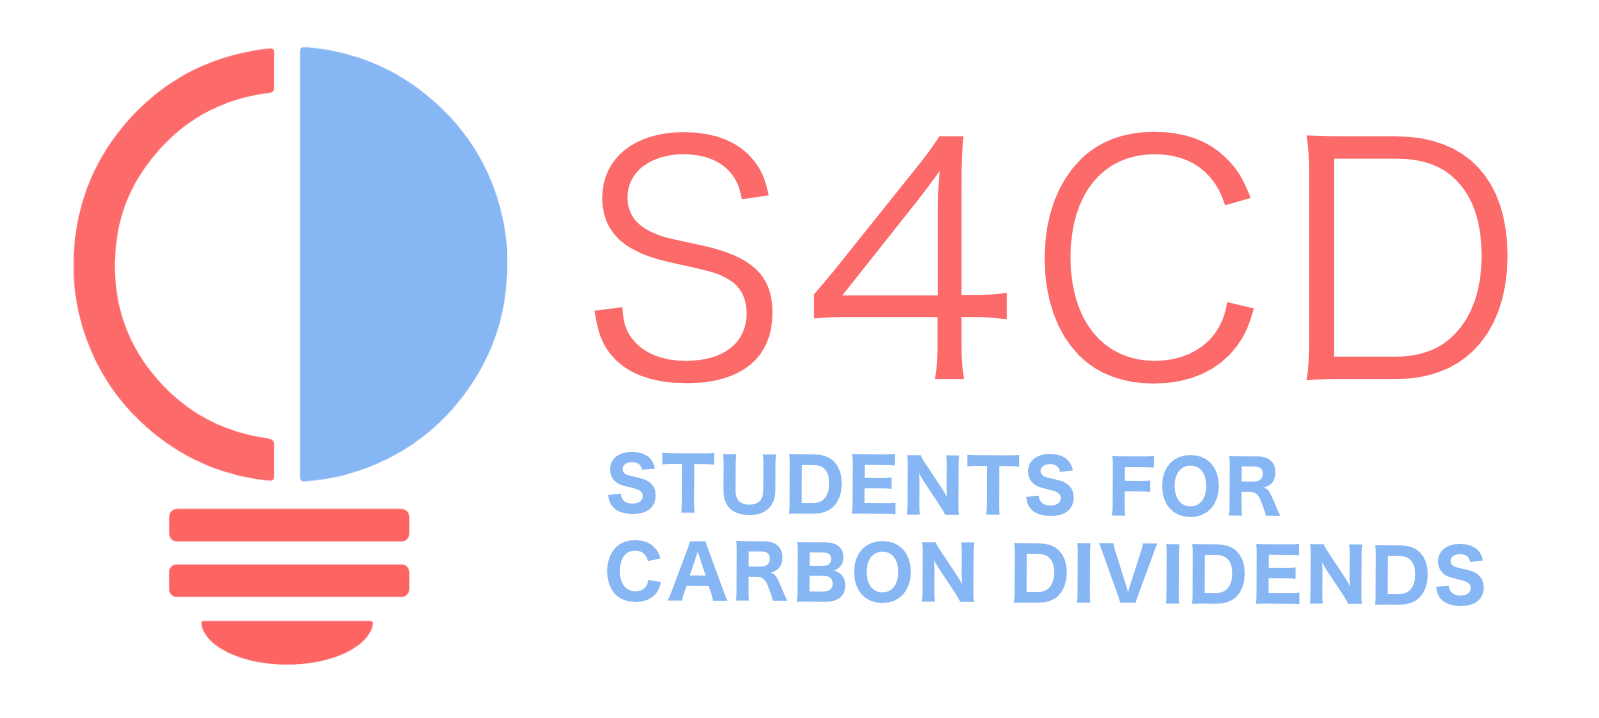 Students for Carbon Dividends